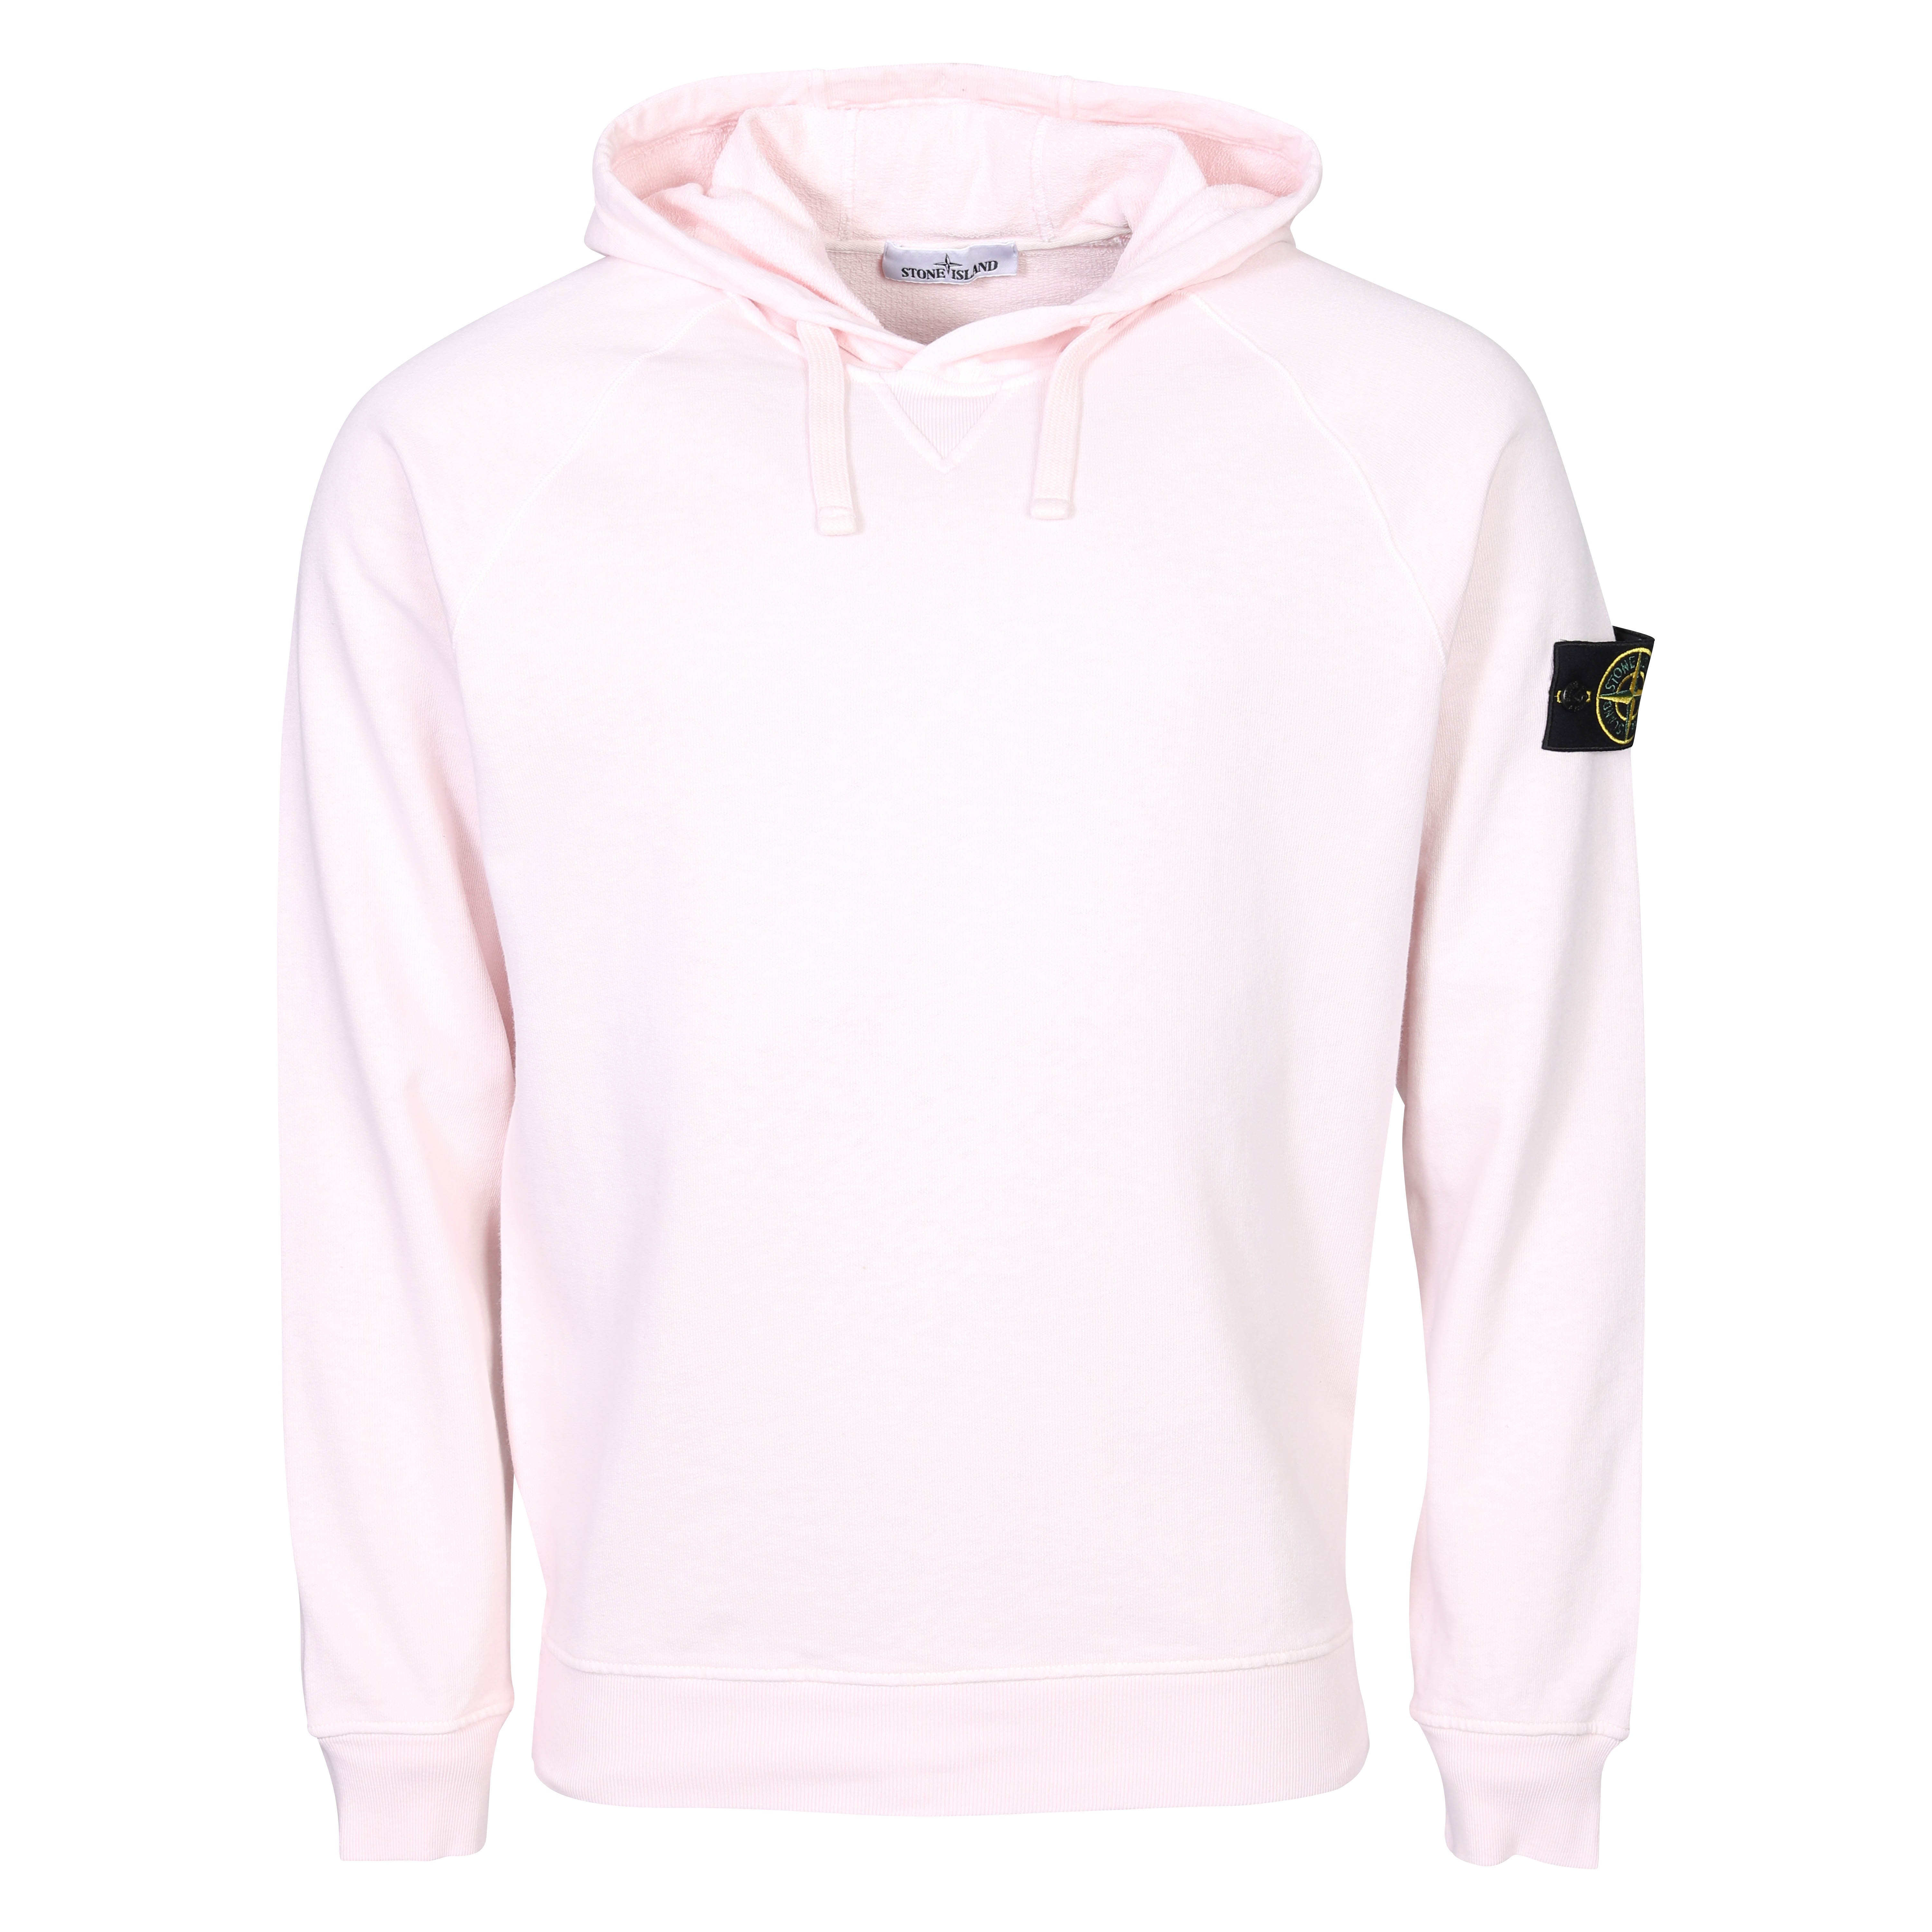 Stone Island Sweat Hoodie in Washed Light Pink 2XL